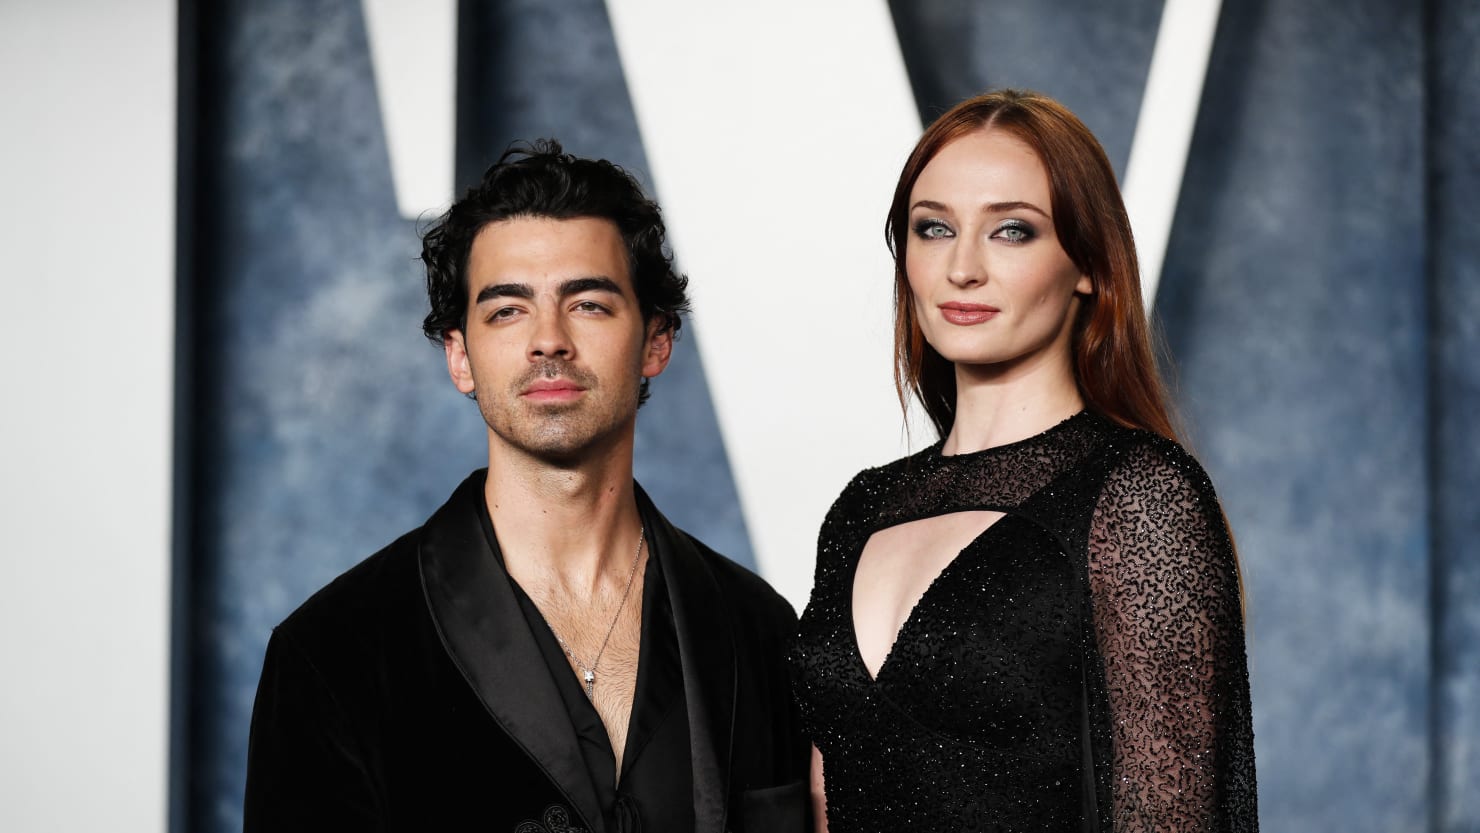 Sophie Turner Explains Why She Was Crying With Joe Jonas in Public